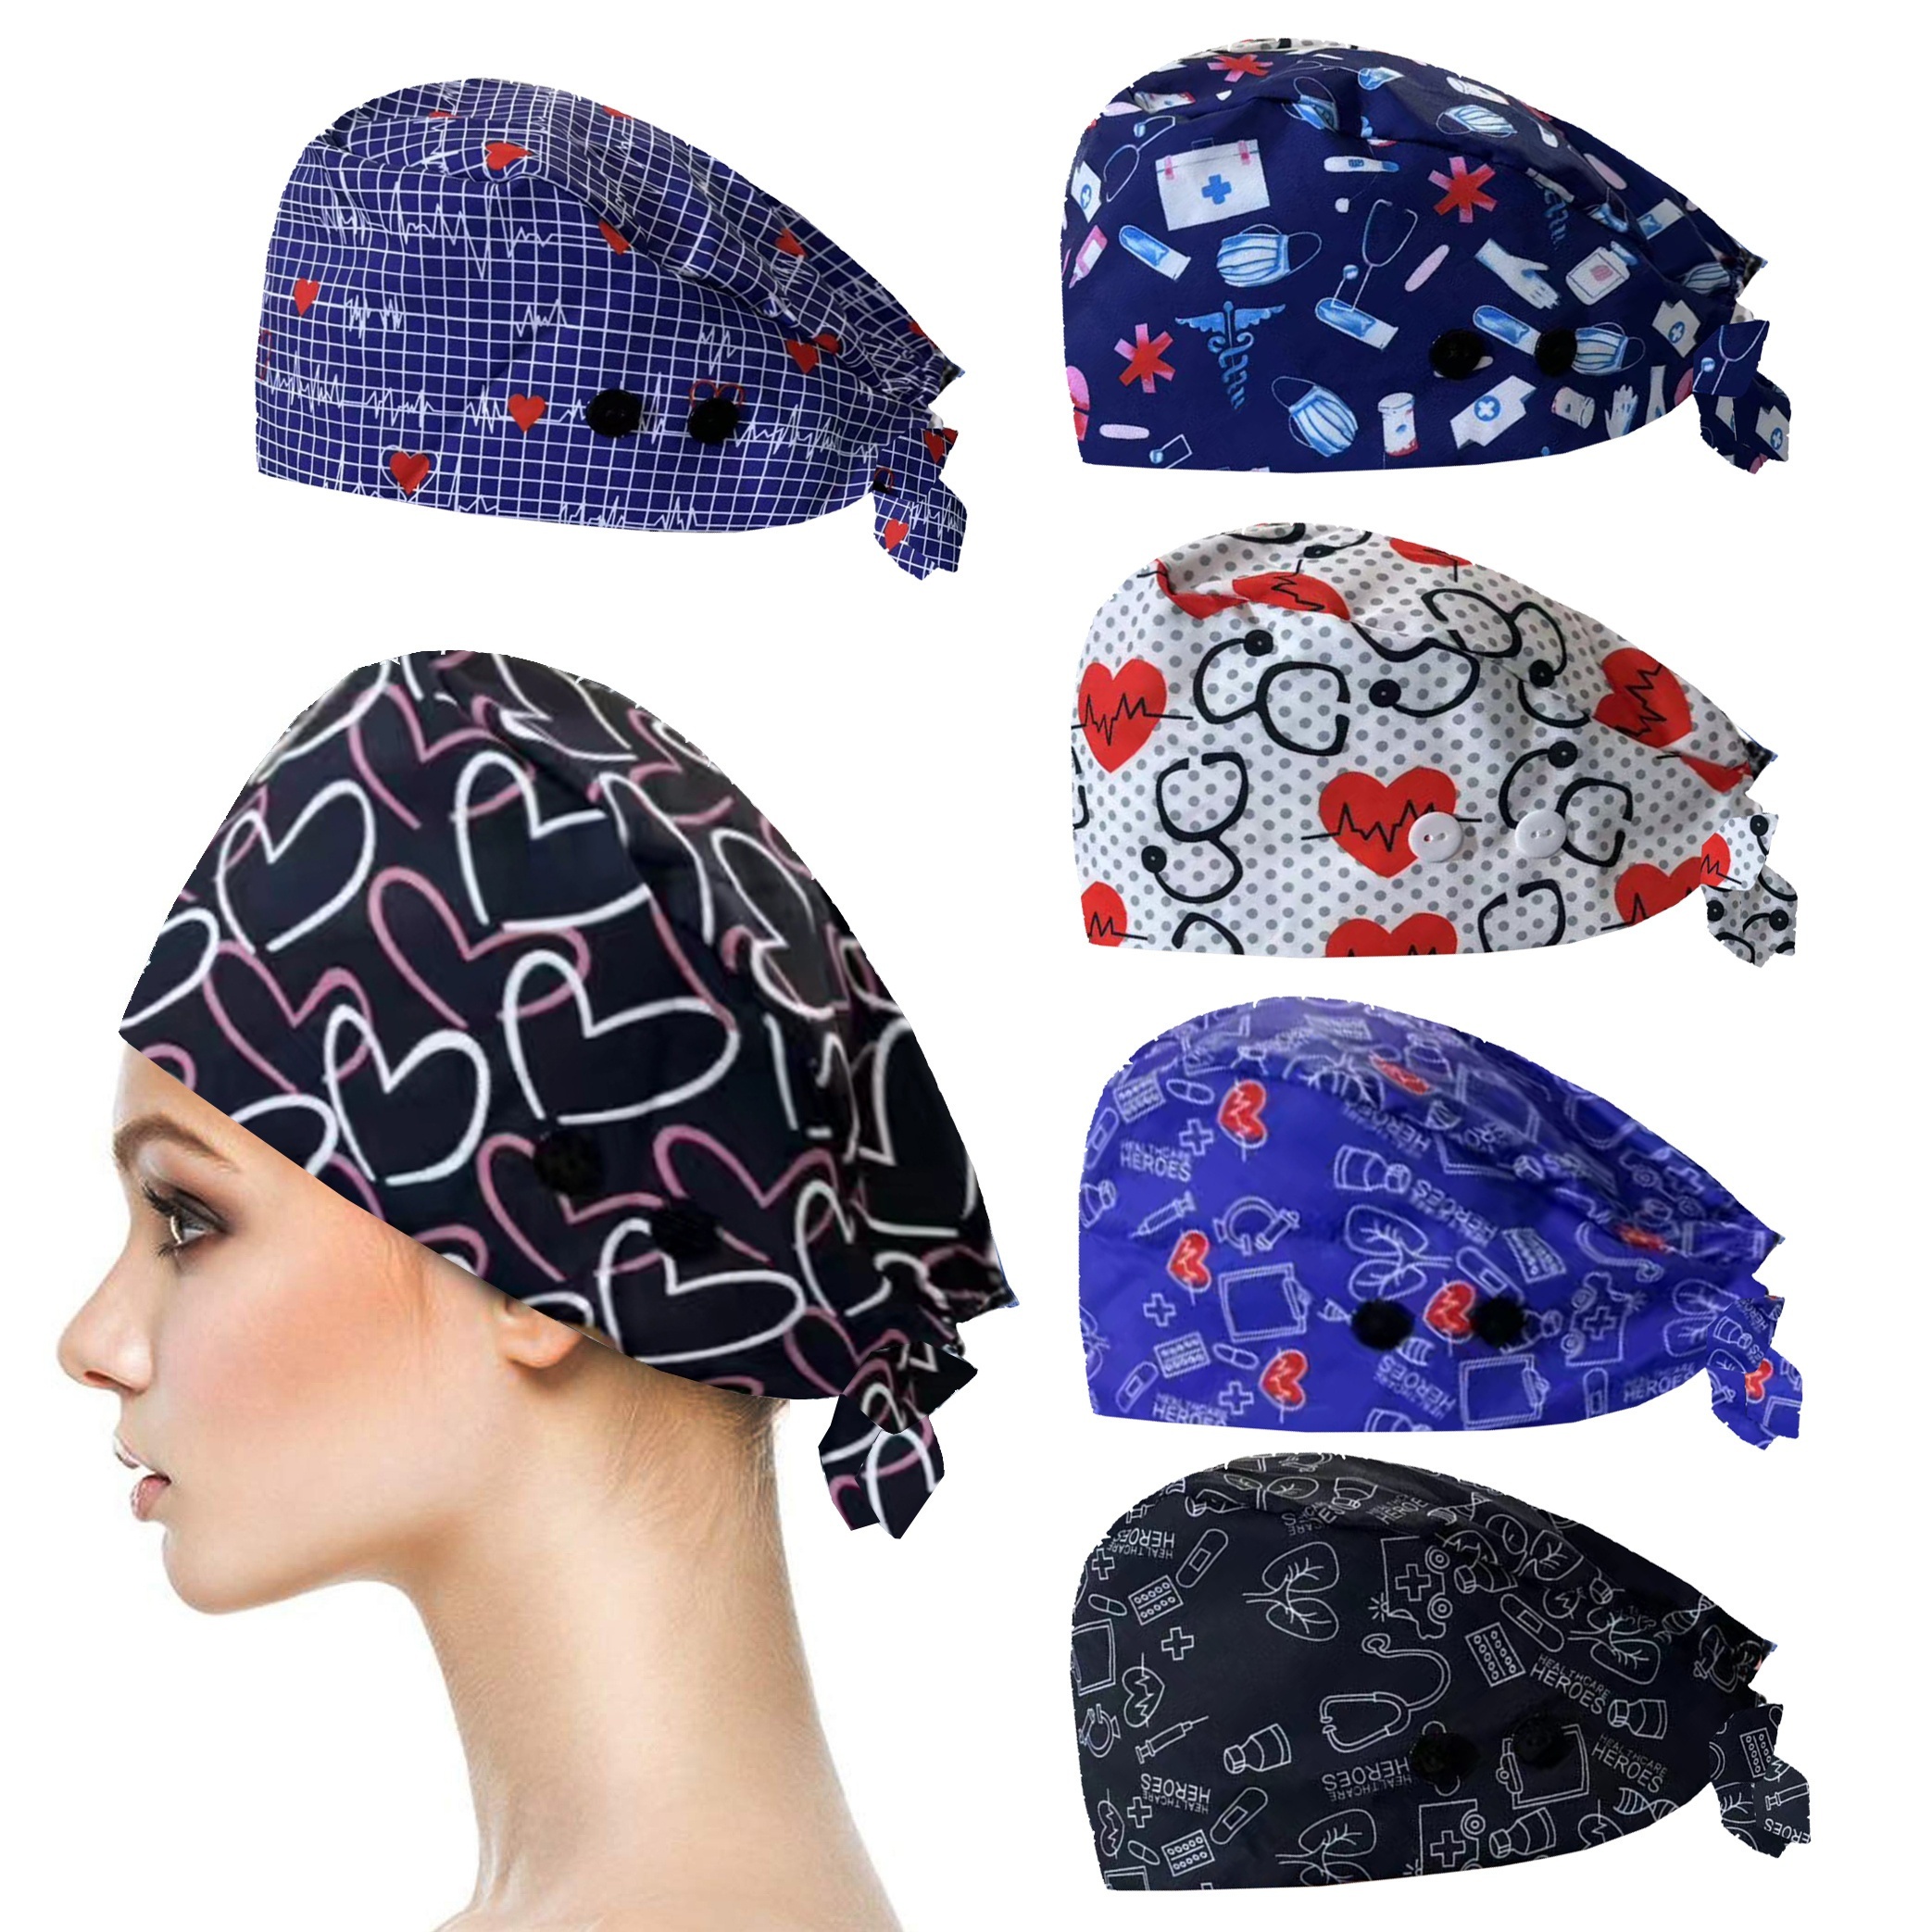 

Unisex Scrub Cap With Button - Stretchy Polyester, Printed Design, Perfect For Work & Everyday Wear